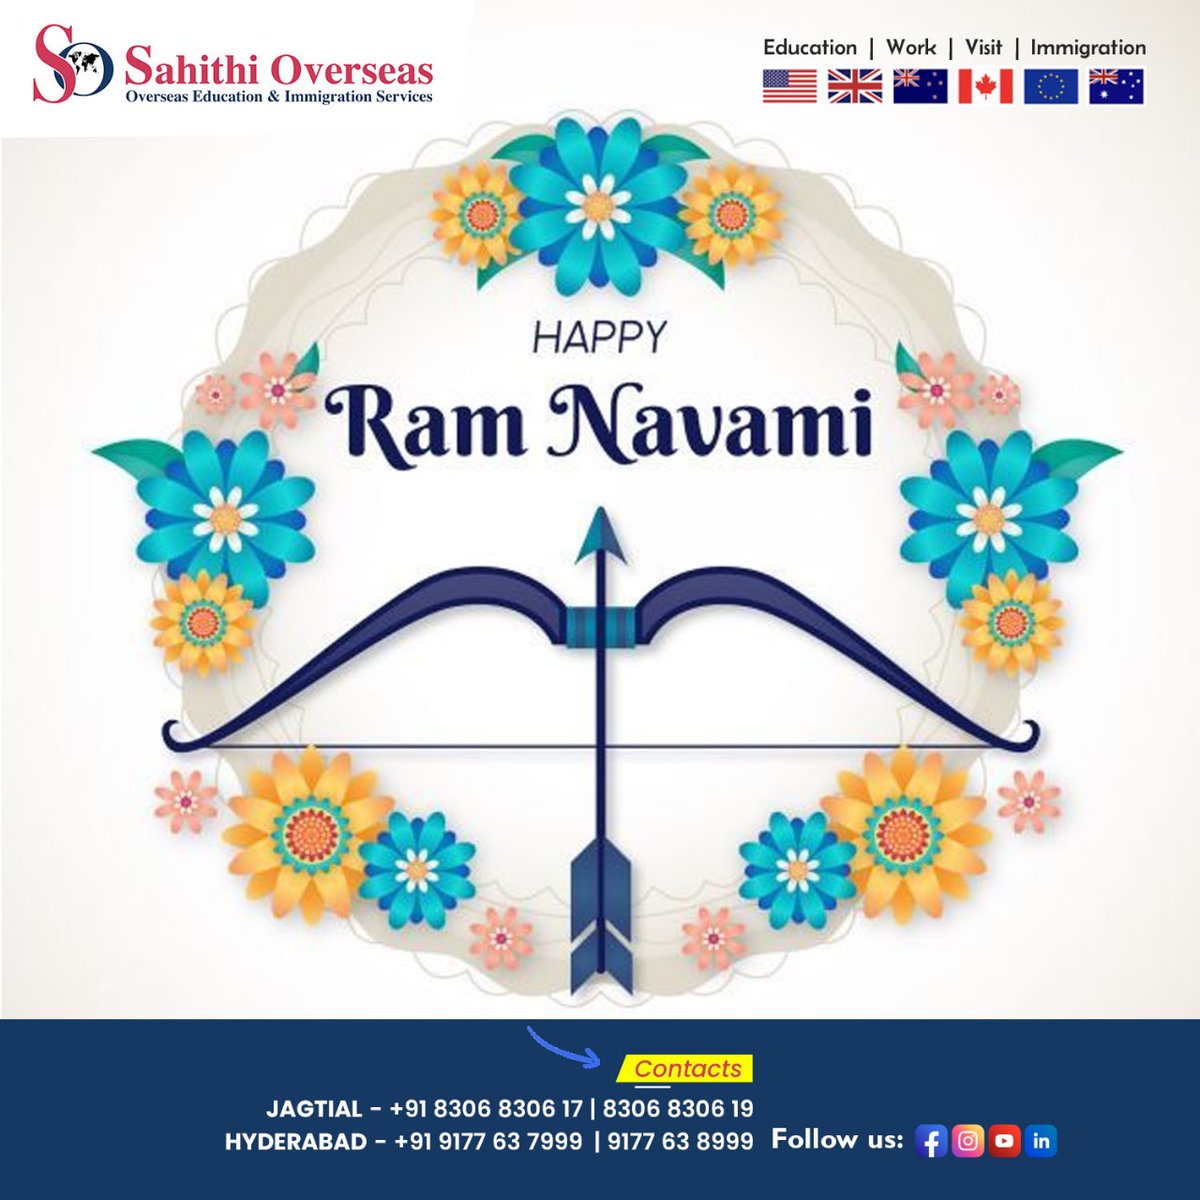 🌟 Happy Sri Rama Navami! 🏹✨ Wishing you abundant joy and prosperity on this divine occasion. Let's embark on a journey of righteousness and unity, just like Lord Rama. 🌺🙏

#educationforall #dreambig #studyabroadlife #SahithiOverseas #StudyAbroad #overseaseducation